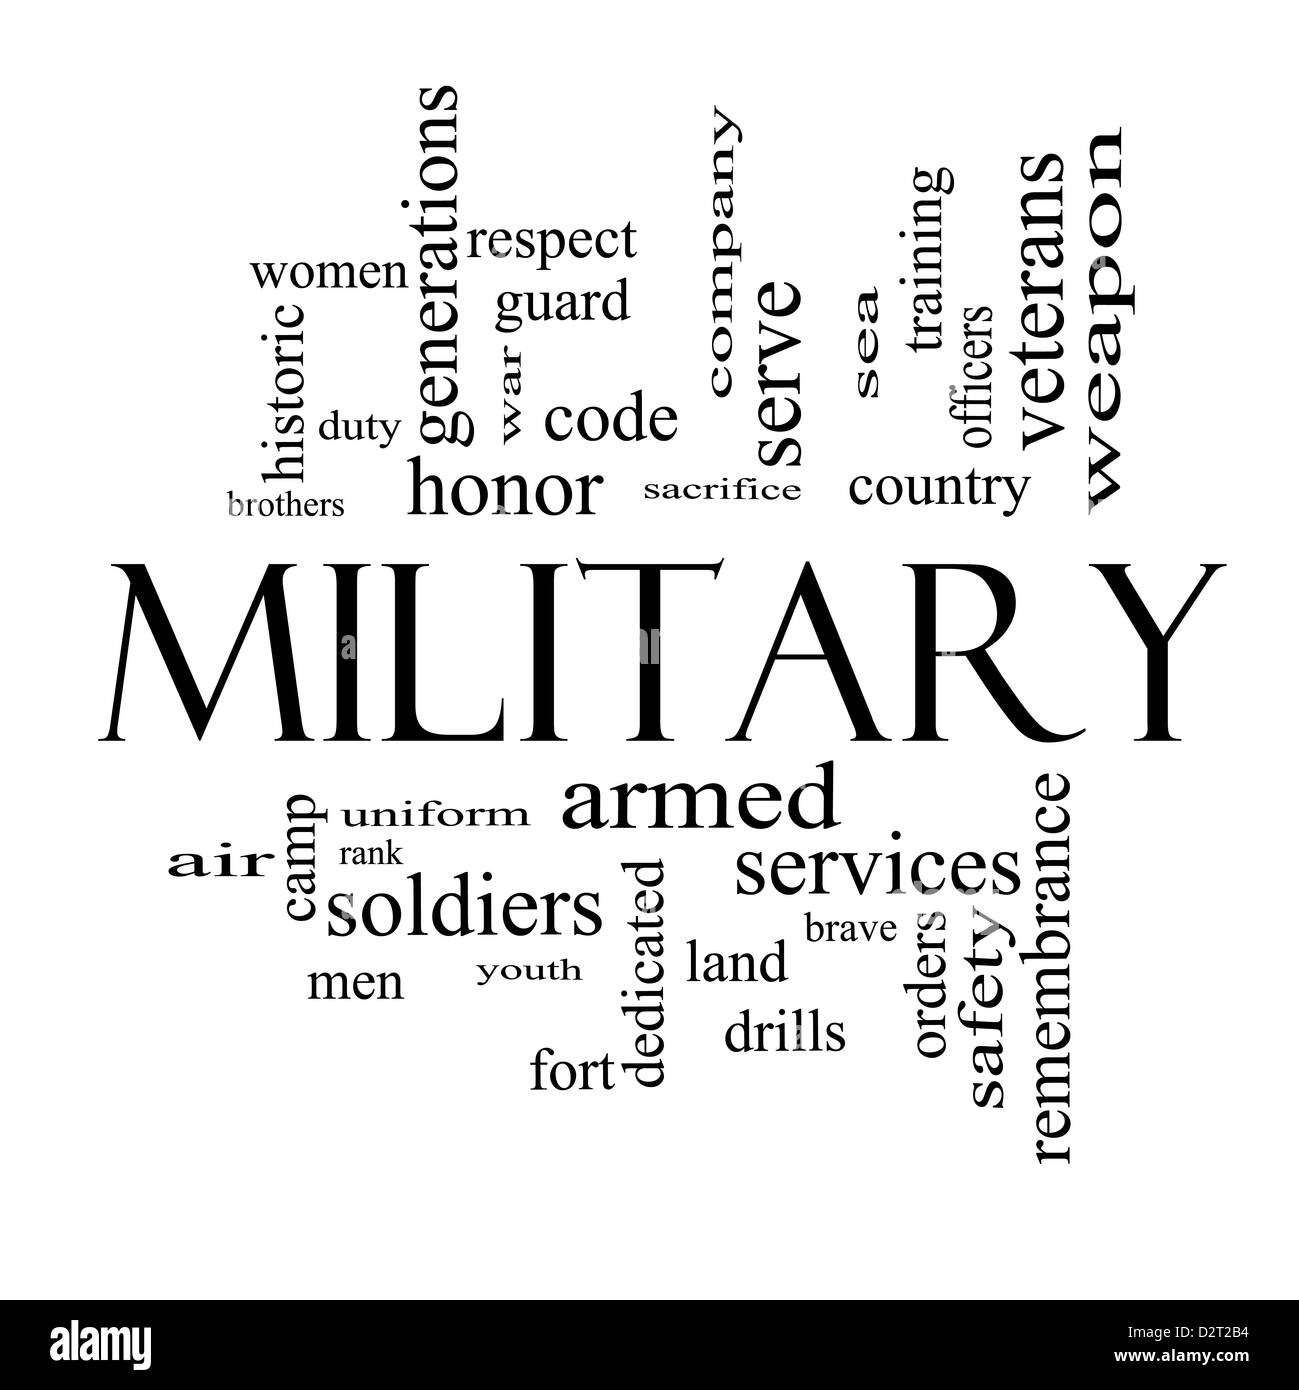 Military Word Cloud Concept in black and white with great terms such as honor, sacrifice, country, brave and more. Stock Photo